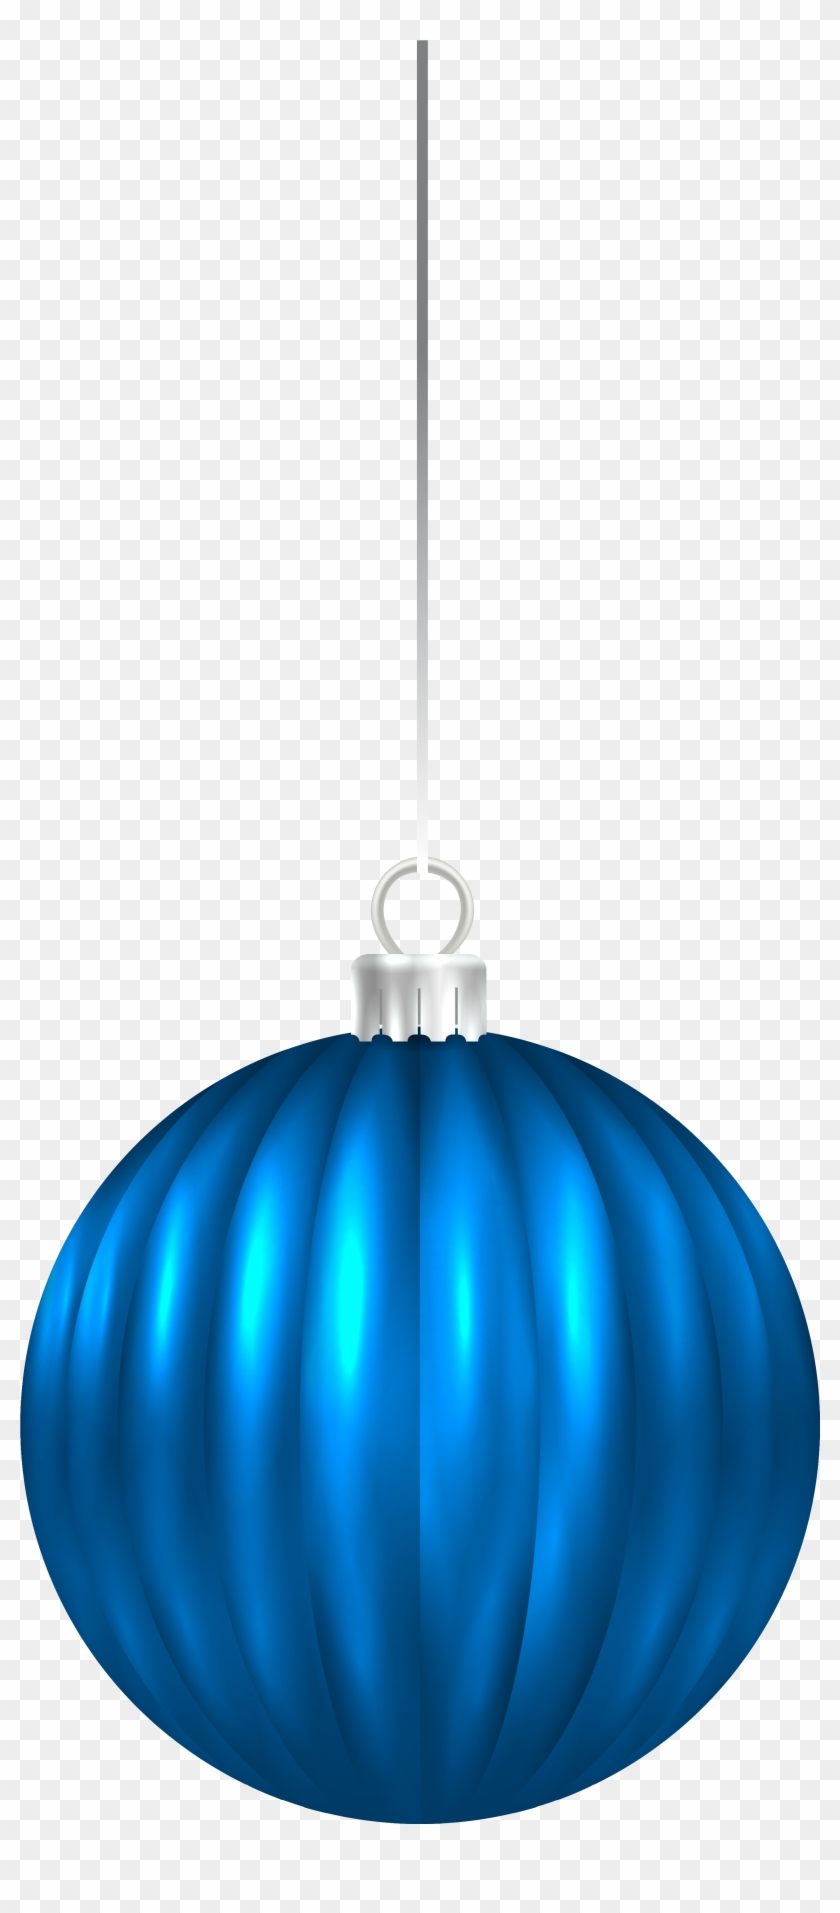 Christmas Ornaments Clipart Blue Christmas - Blue Christmas Ball Png Transparent Png #141812